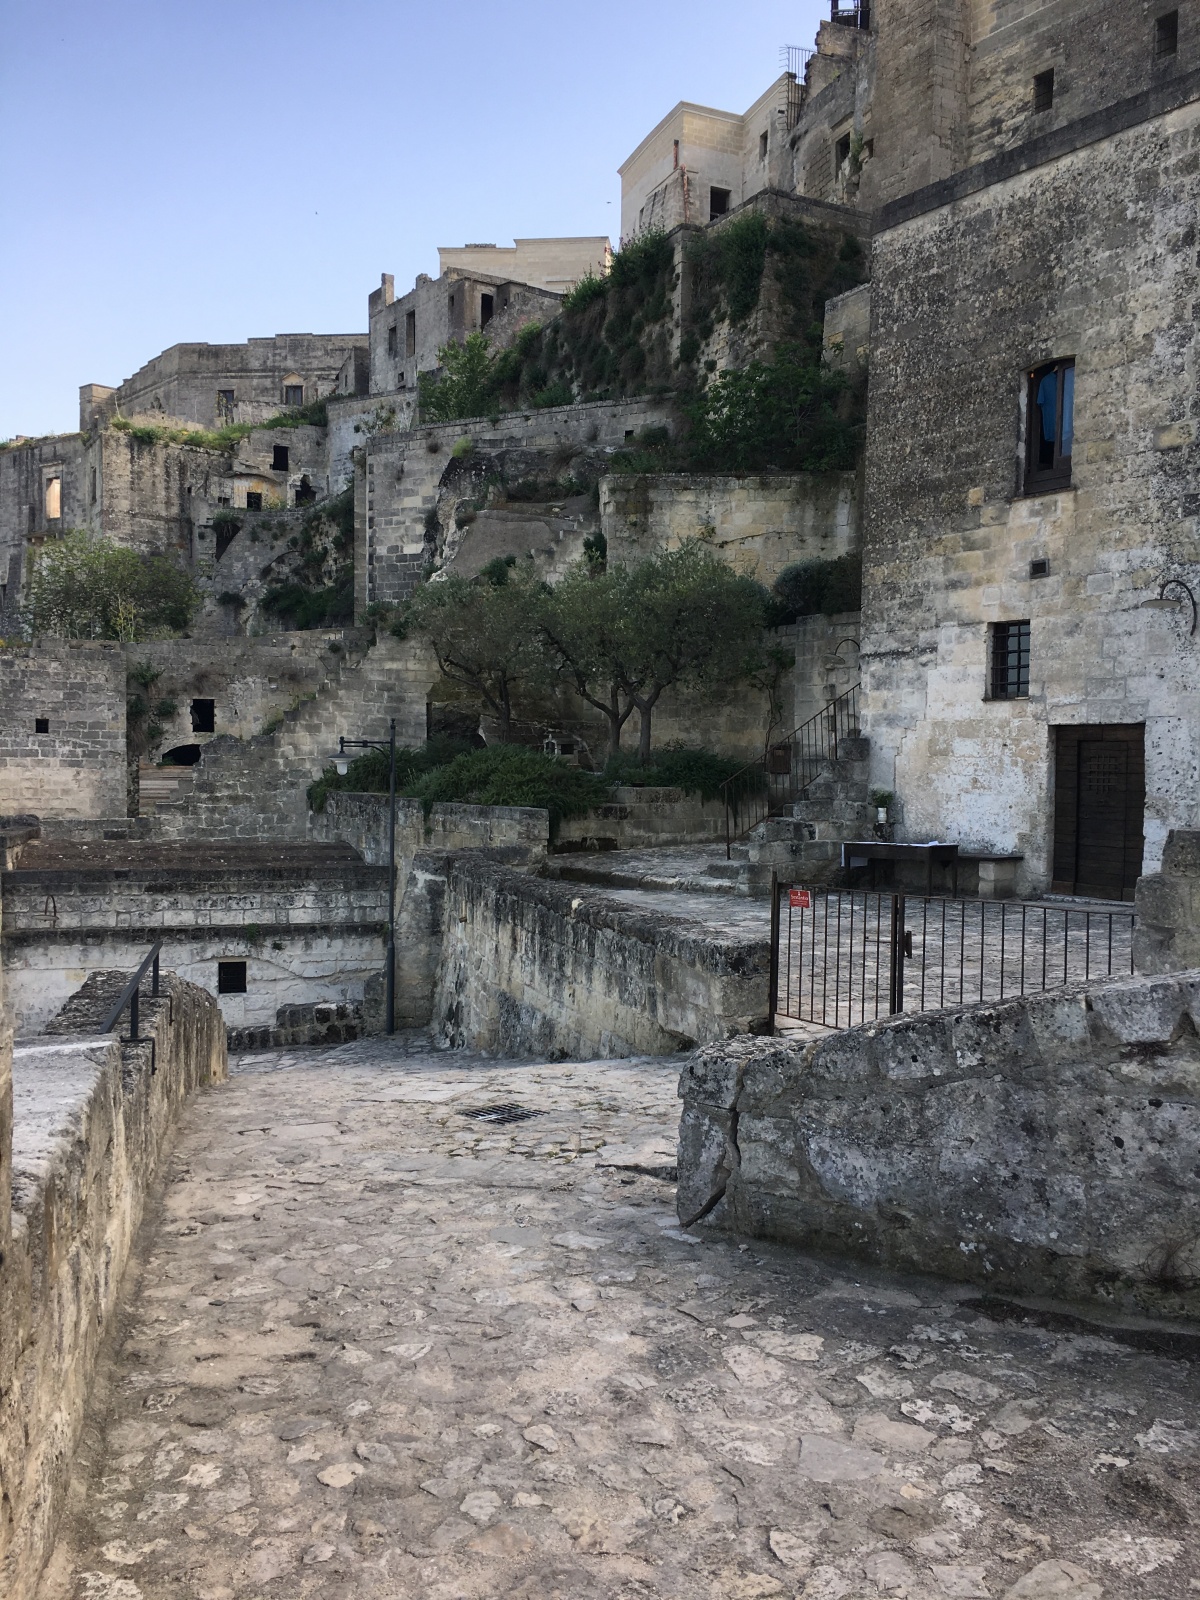 Matera: Where to stay, what to see and do in Matera. We visited on our 10-day Italian babymoon.